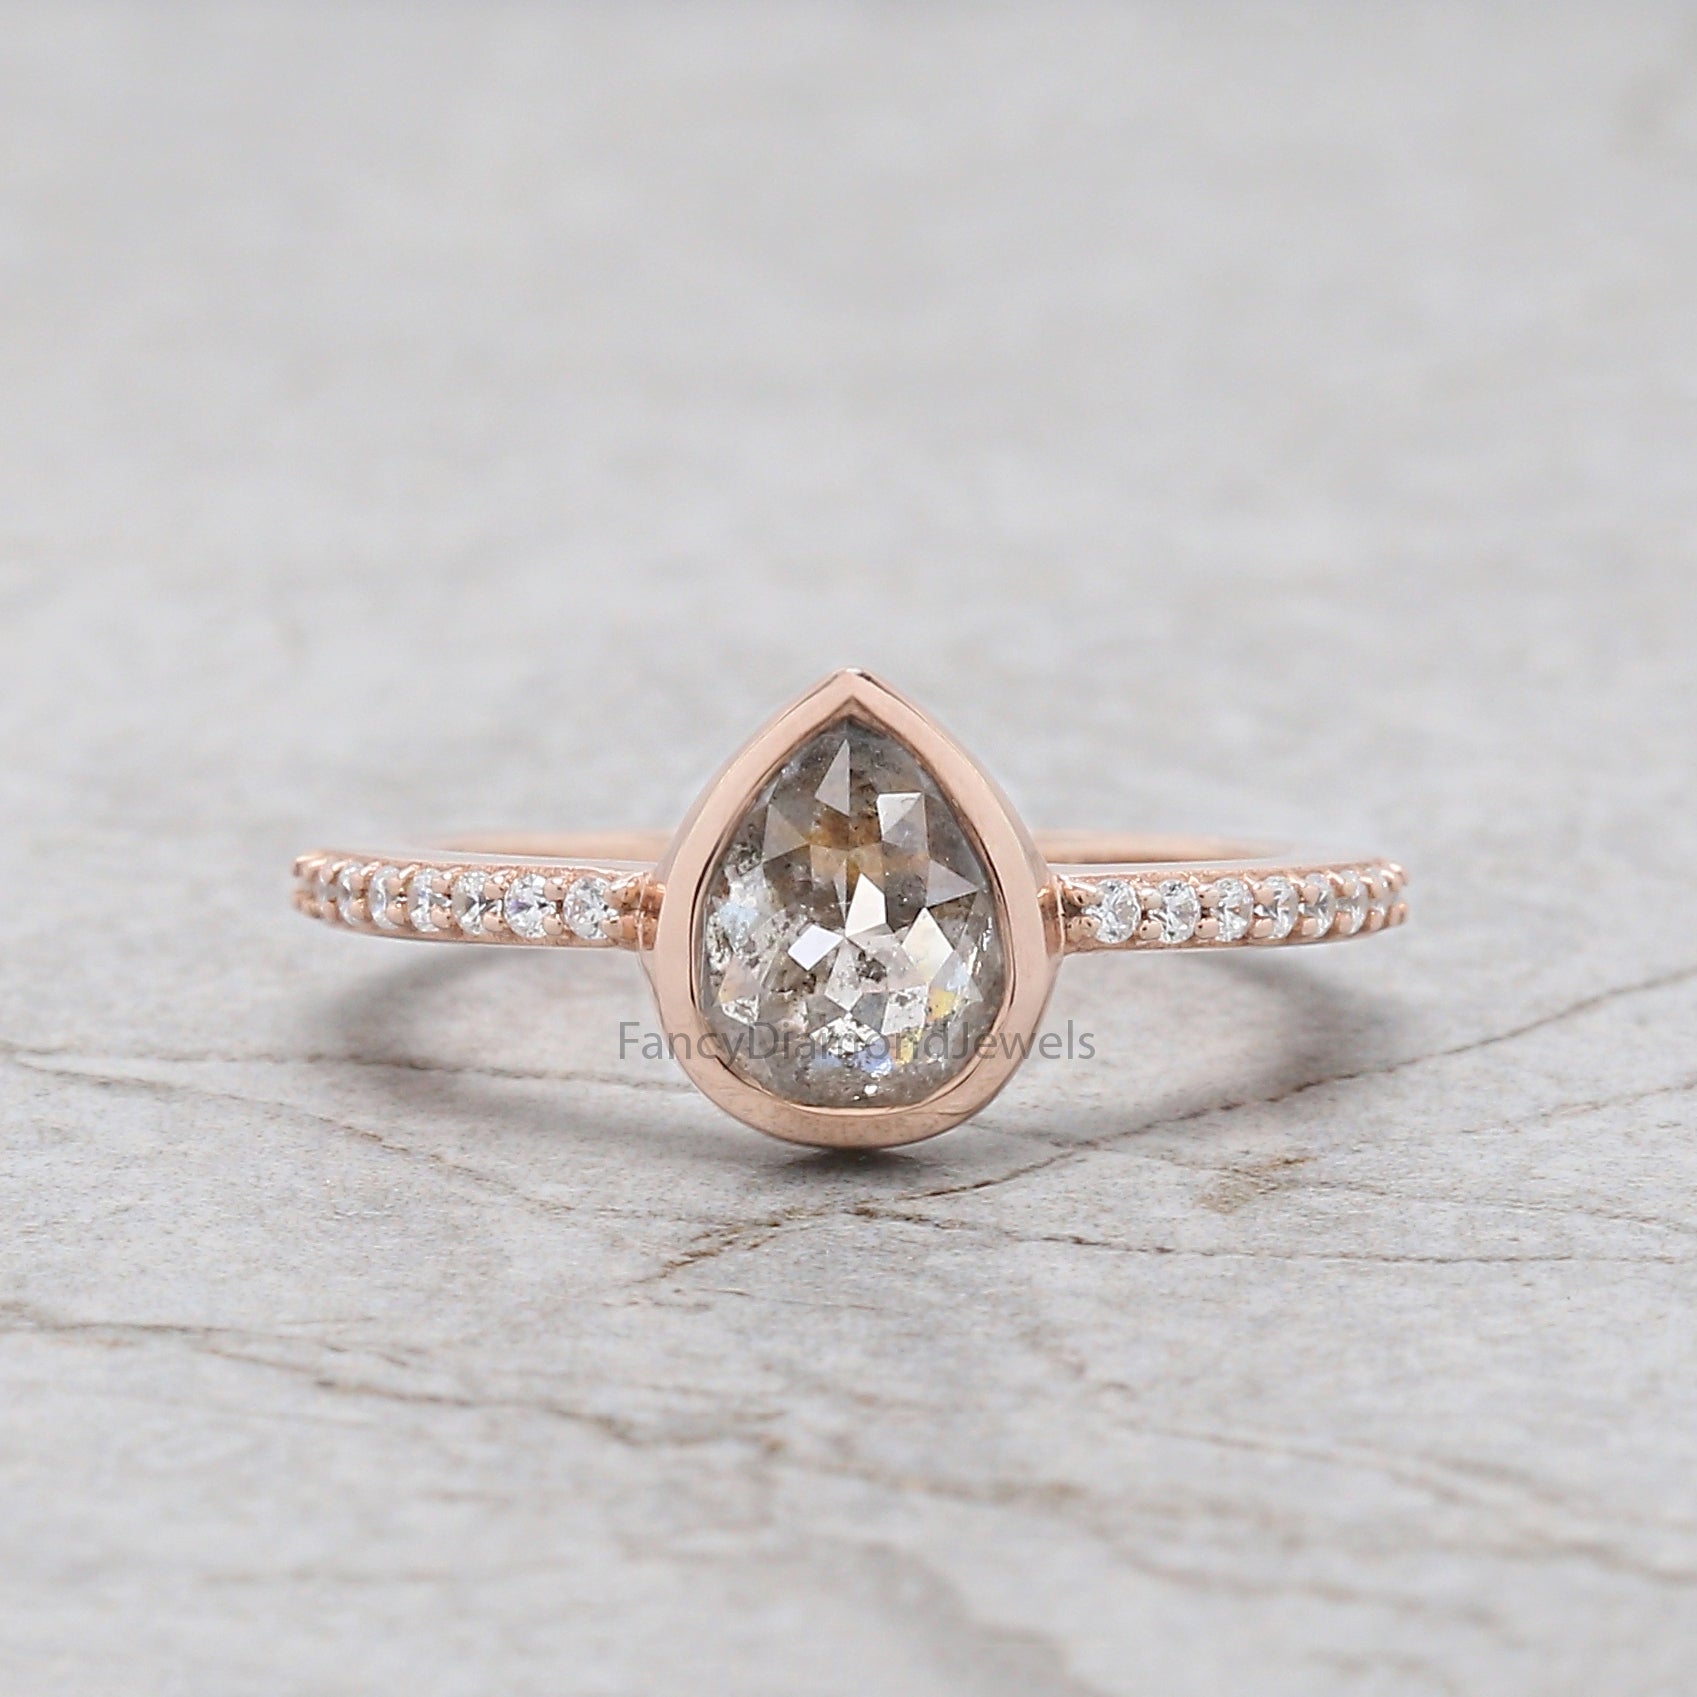 Pear Cut Salt And Pepper Diamond Ring 1.39 Ct 7.90 MM Pear Diamond Ring 14K Solid Rose Gold Silver Pear Engagement Ring Gift For Her QN9360